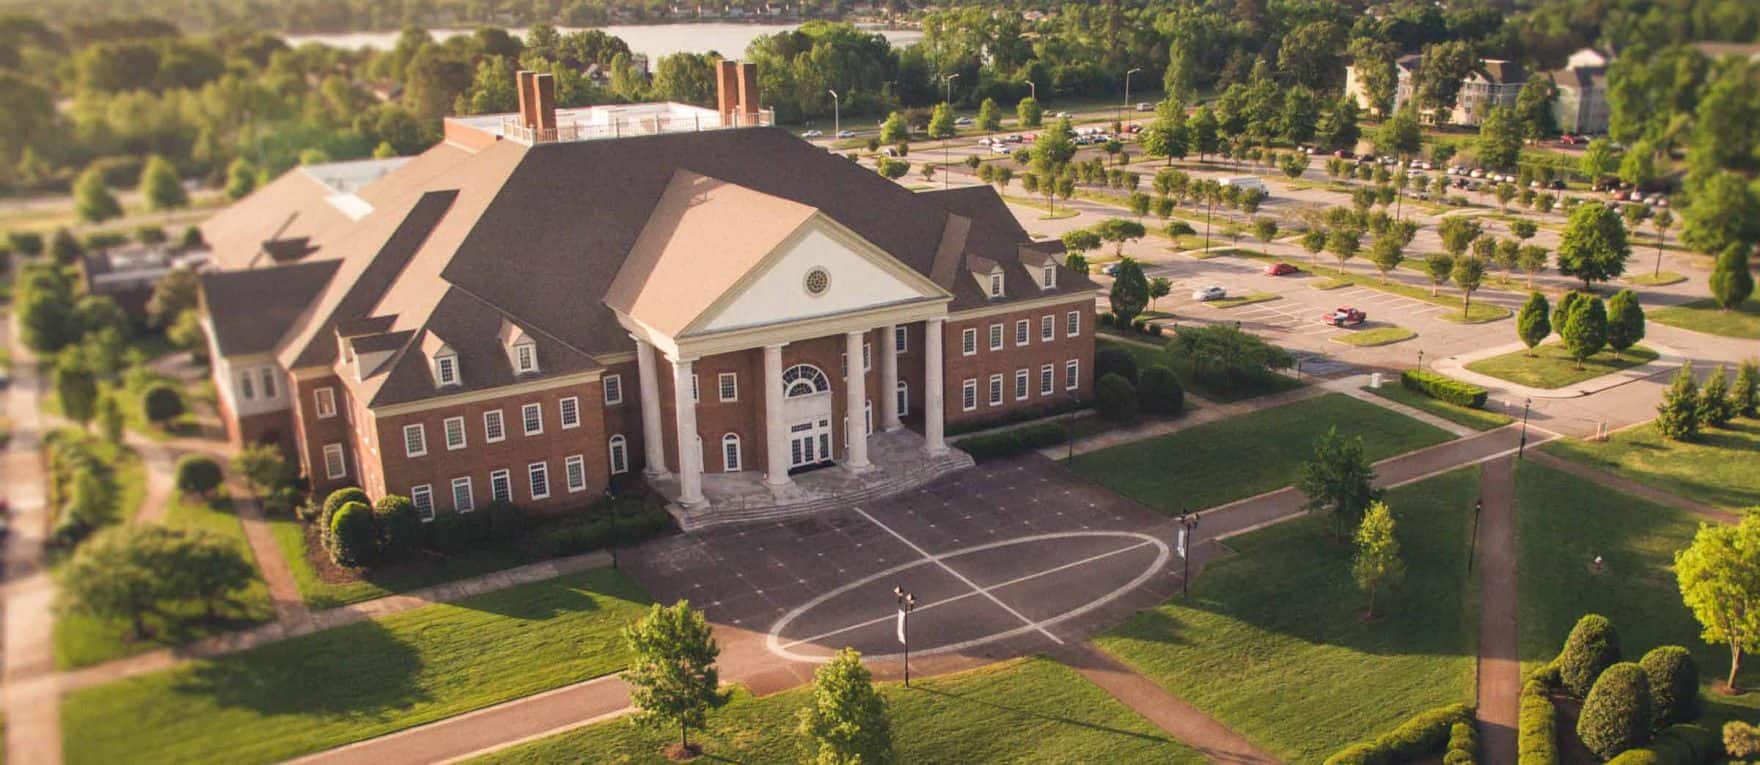 Image of Regent University campus, $4k private school scholarship available